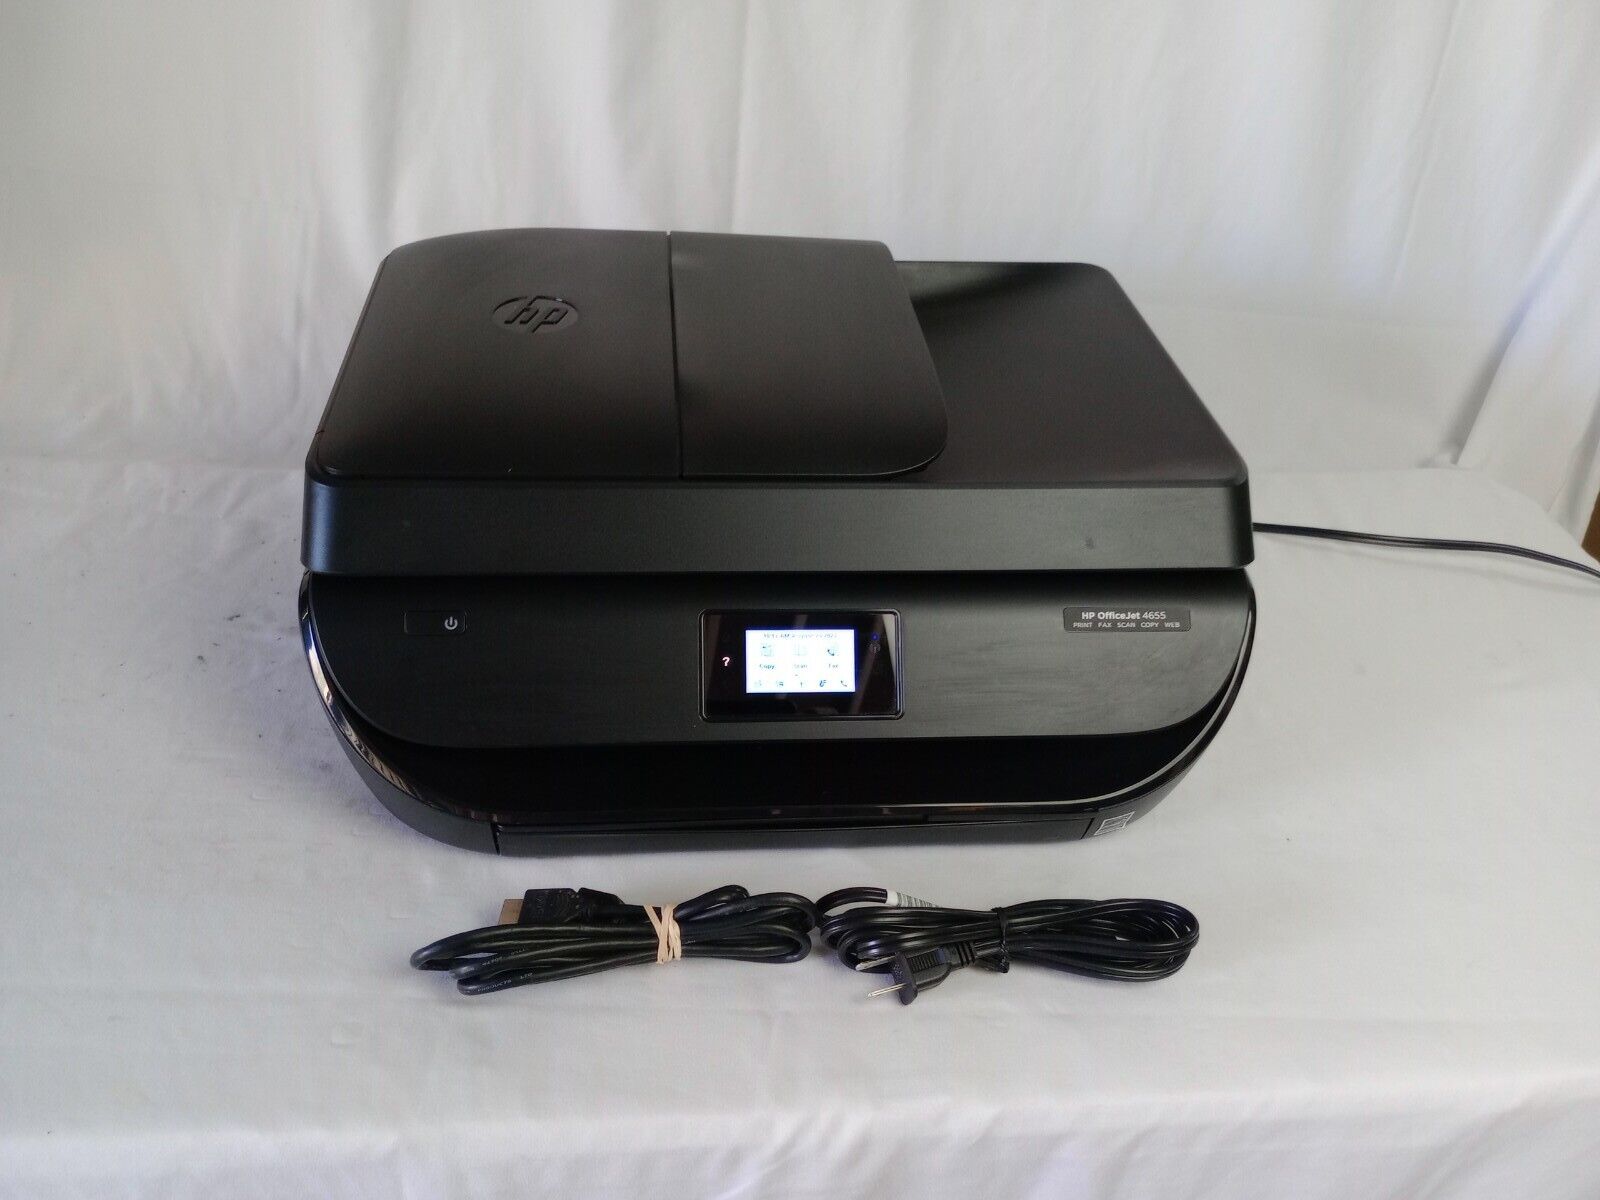 HP OfficeJet 4650 All-in-One Printer Tested Works Low Pages Printed.